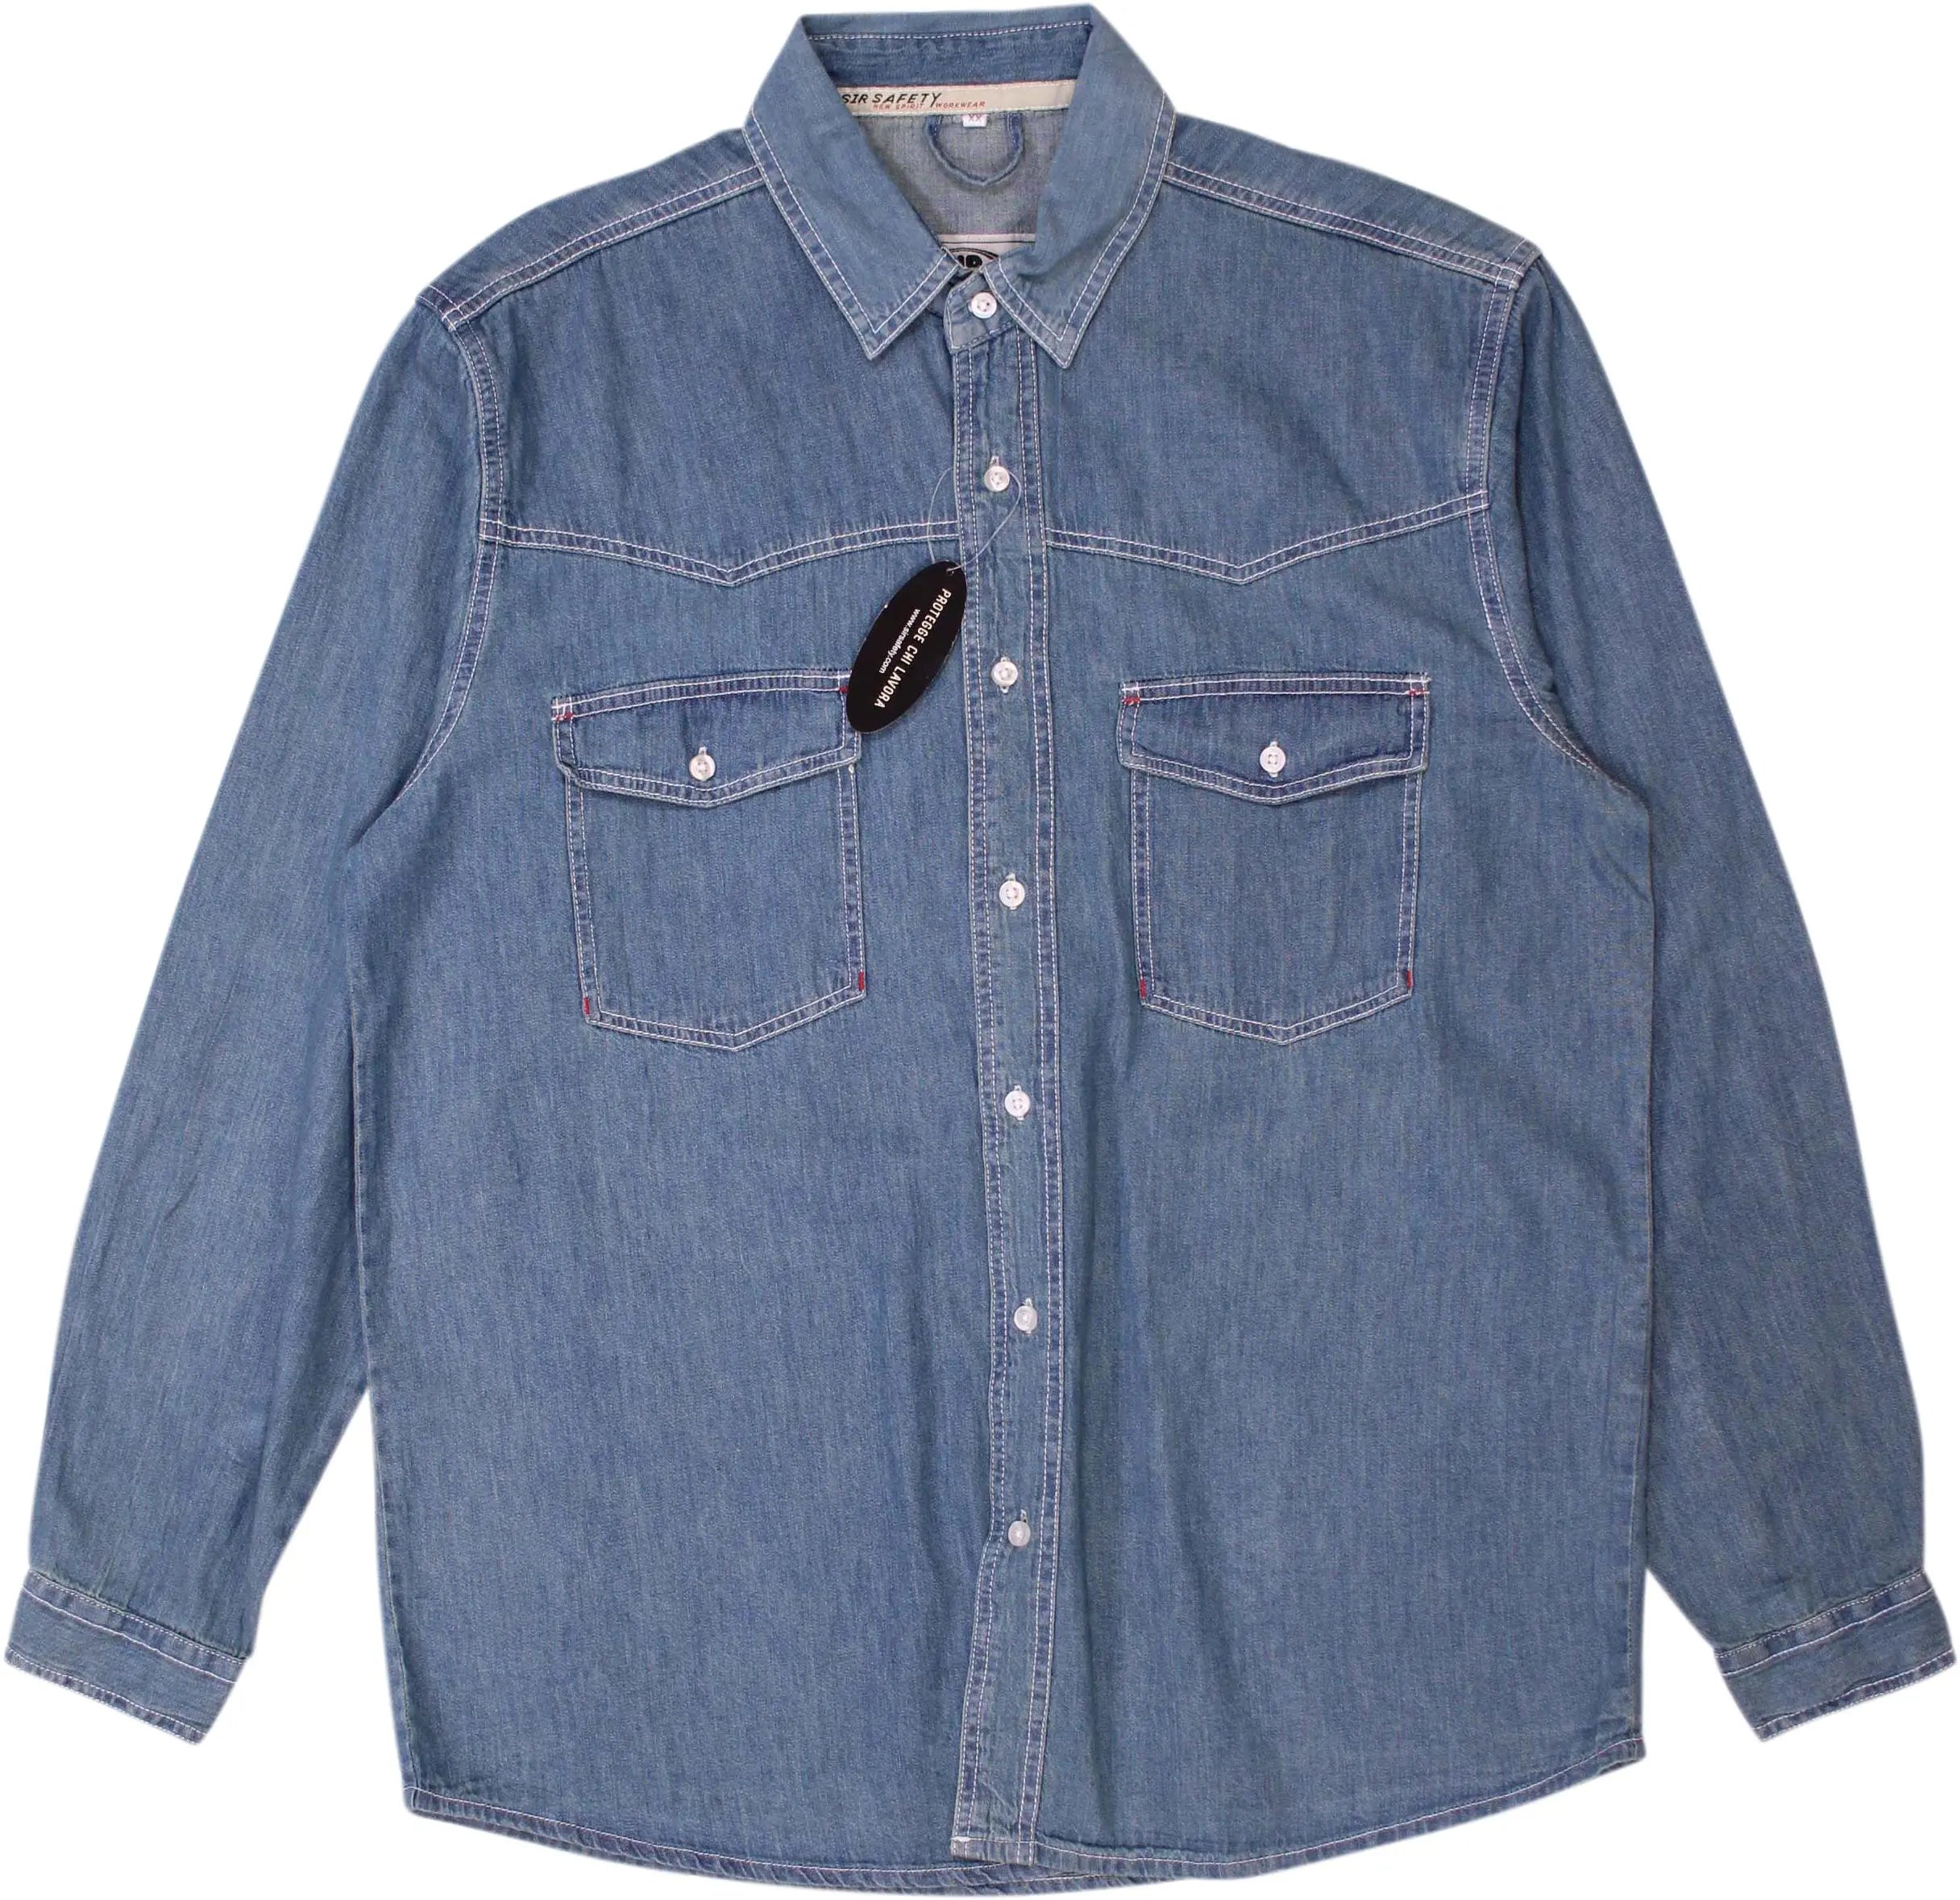 Sir - Denim Shirt- ThriftTale.com - Vintage and second handclothing